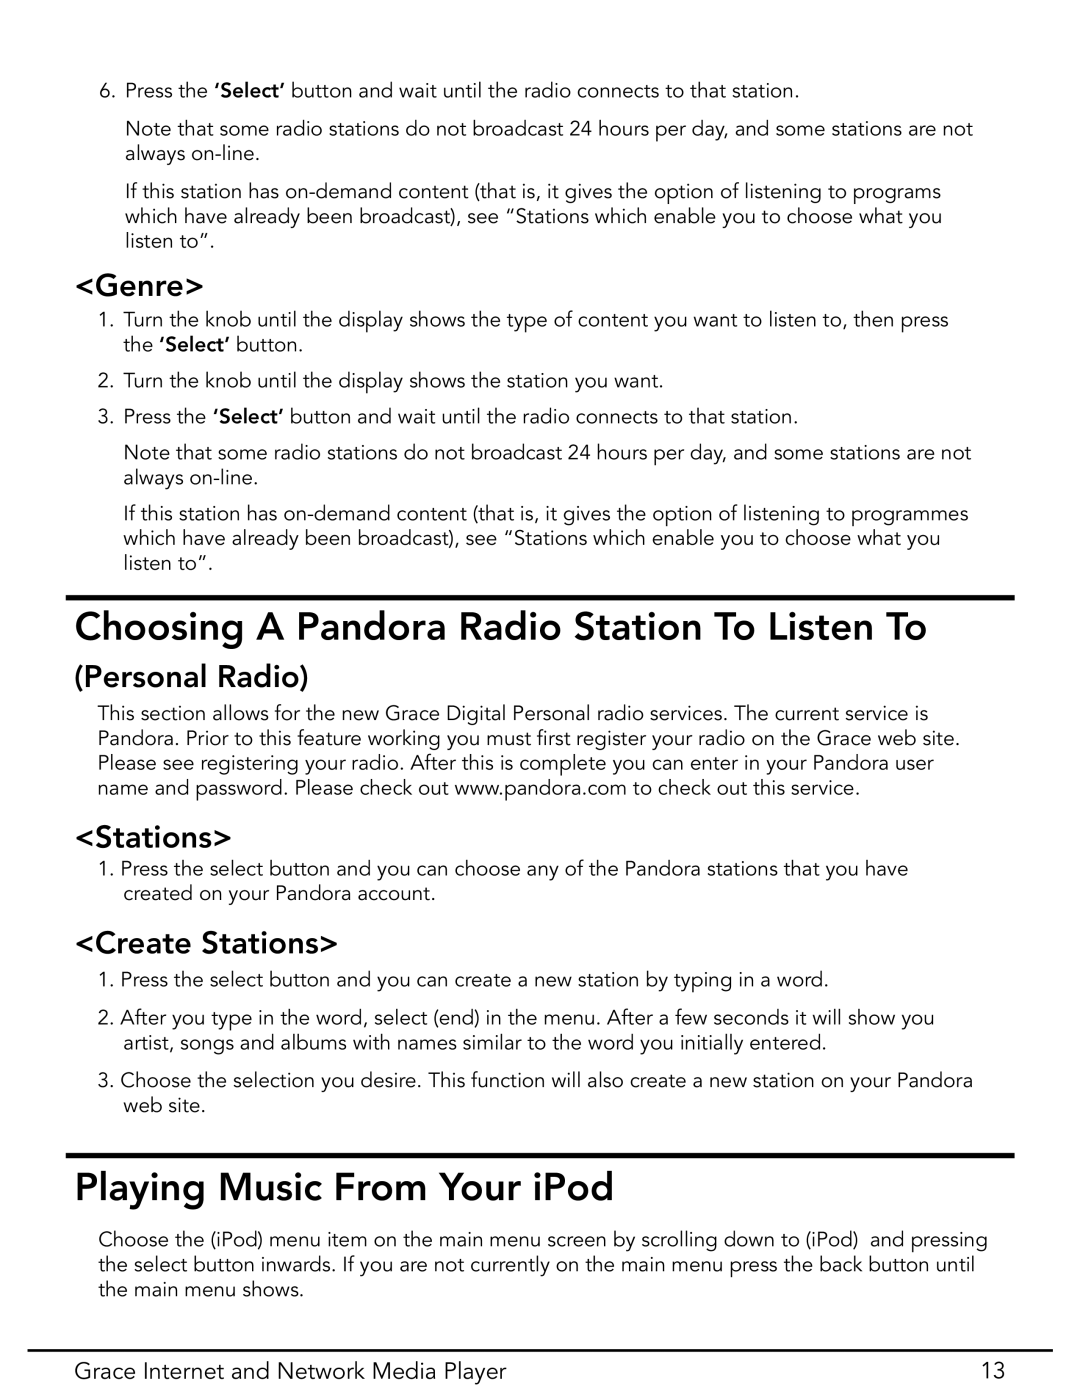 Grace GDI-IR3020 manual Choosing A Pandora Radio Station To Listen To, Playing Music From Your iPod, Genre, Personal Radio 